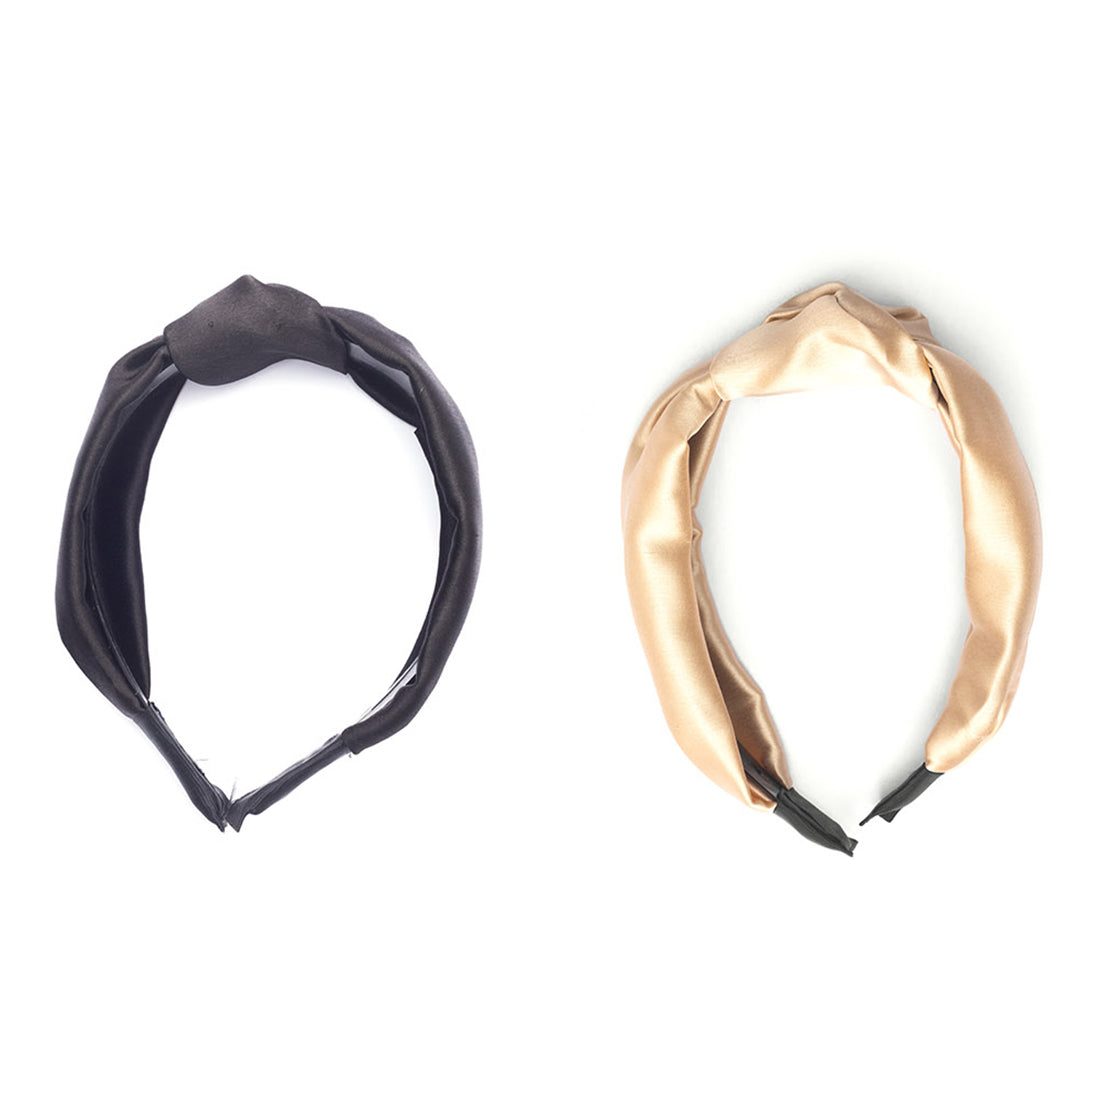 Set Of 2 Chic Beige And Black Satin Hairband With Elegant Top Knot